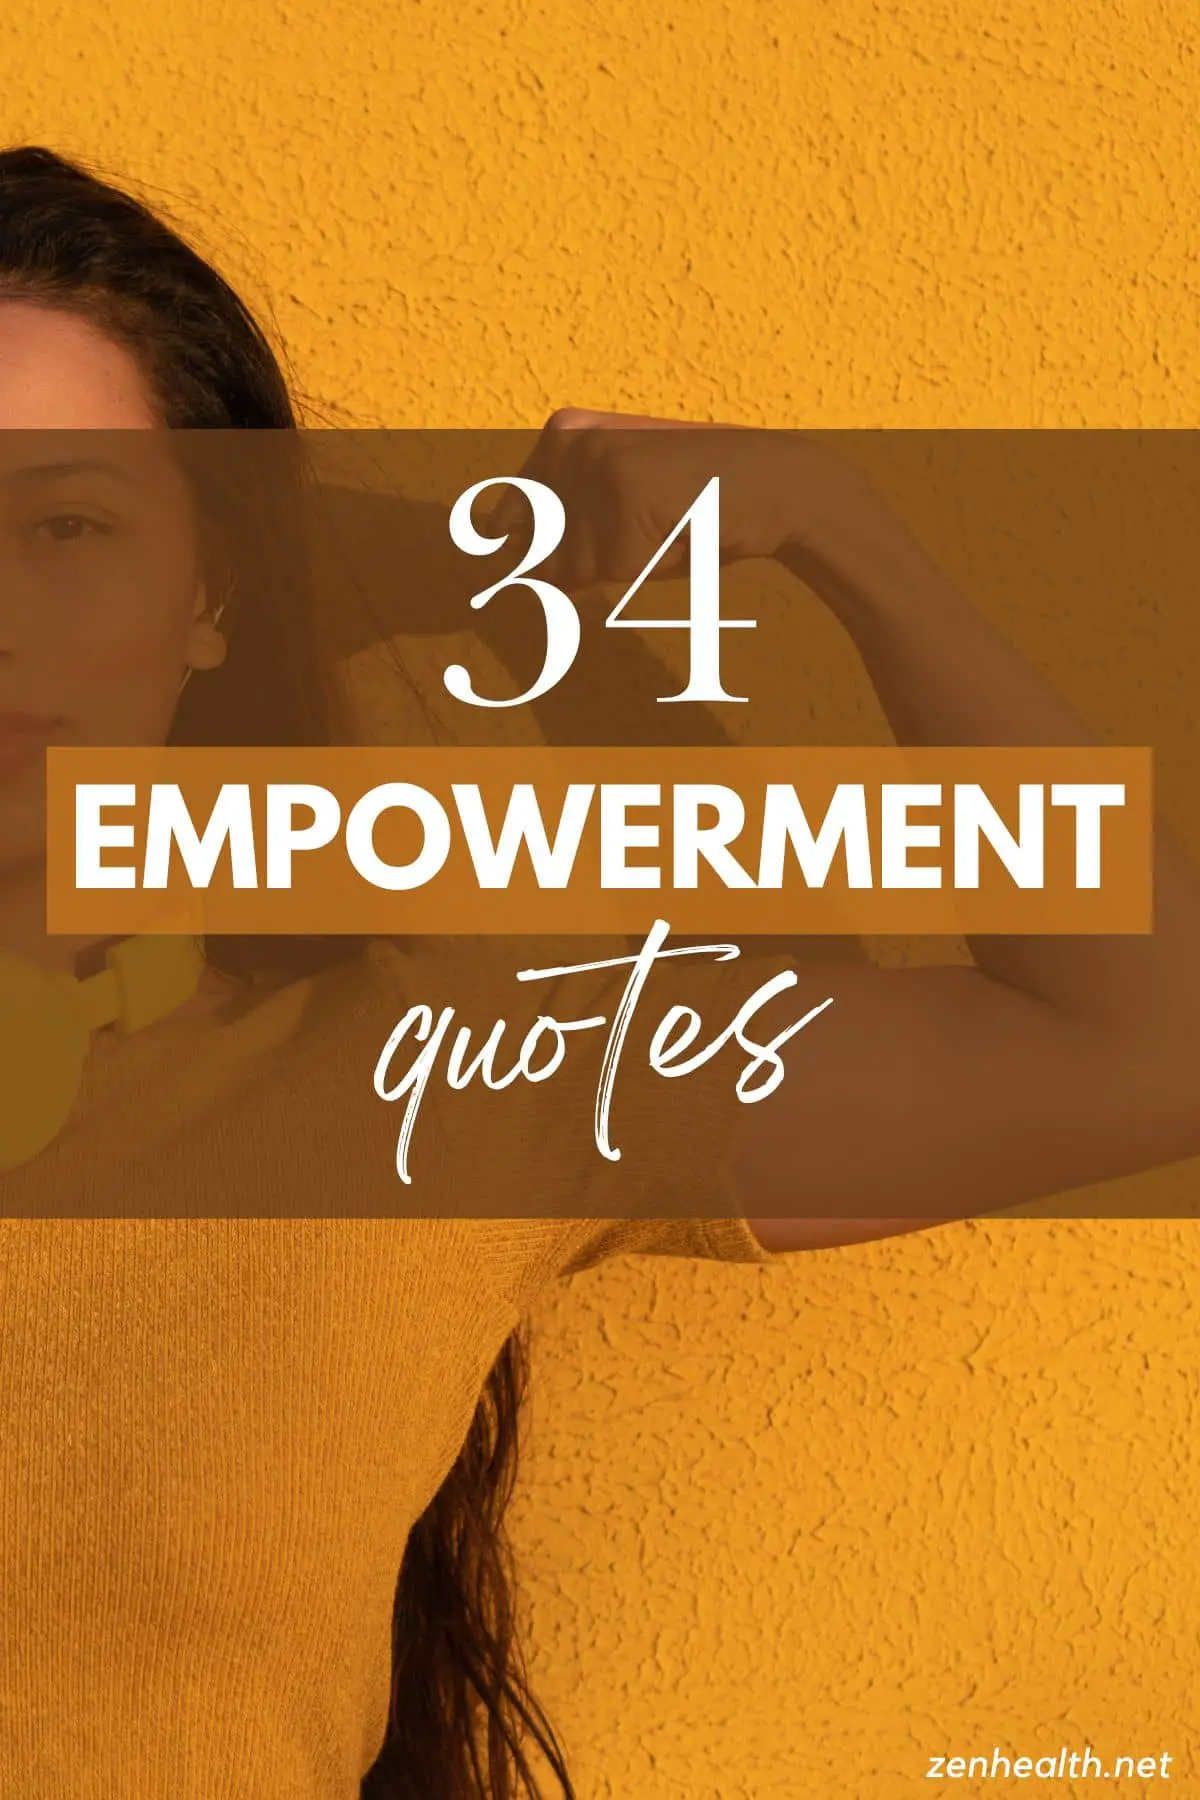 34 empowerment quotes text overlay on a woman flexing her bicep while wearing a yellow outfit in front of a yellow wall